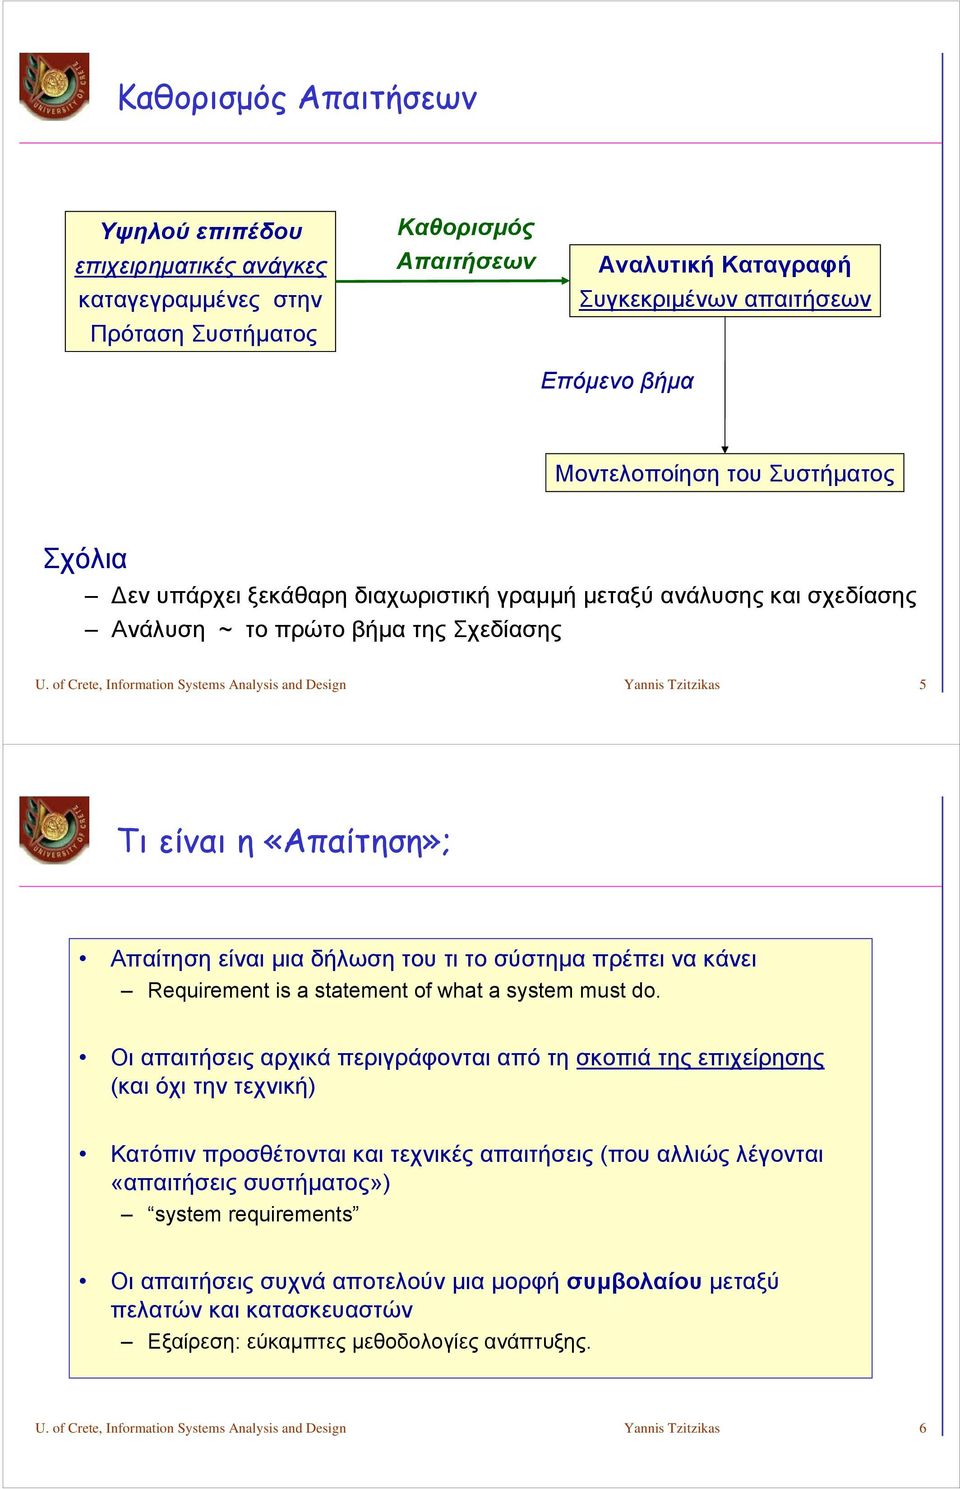 of Crete, Information Systems Analysis and Design Yannis Tzitzikas 5 Τι είναι η «Απαίτηση»; Απαίτηση είναι μια δήλωση του τι το σύστημα πρέπει να κάνει Requirement is a statement of what a system